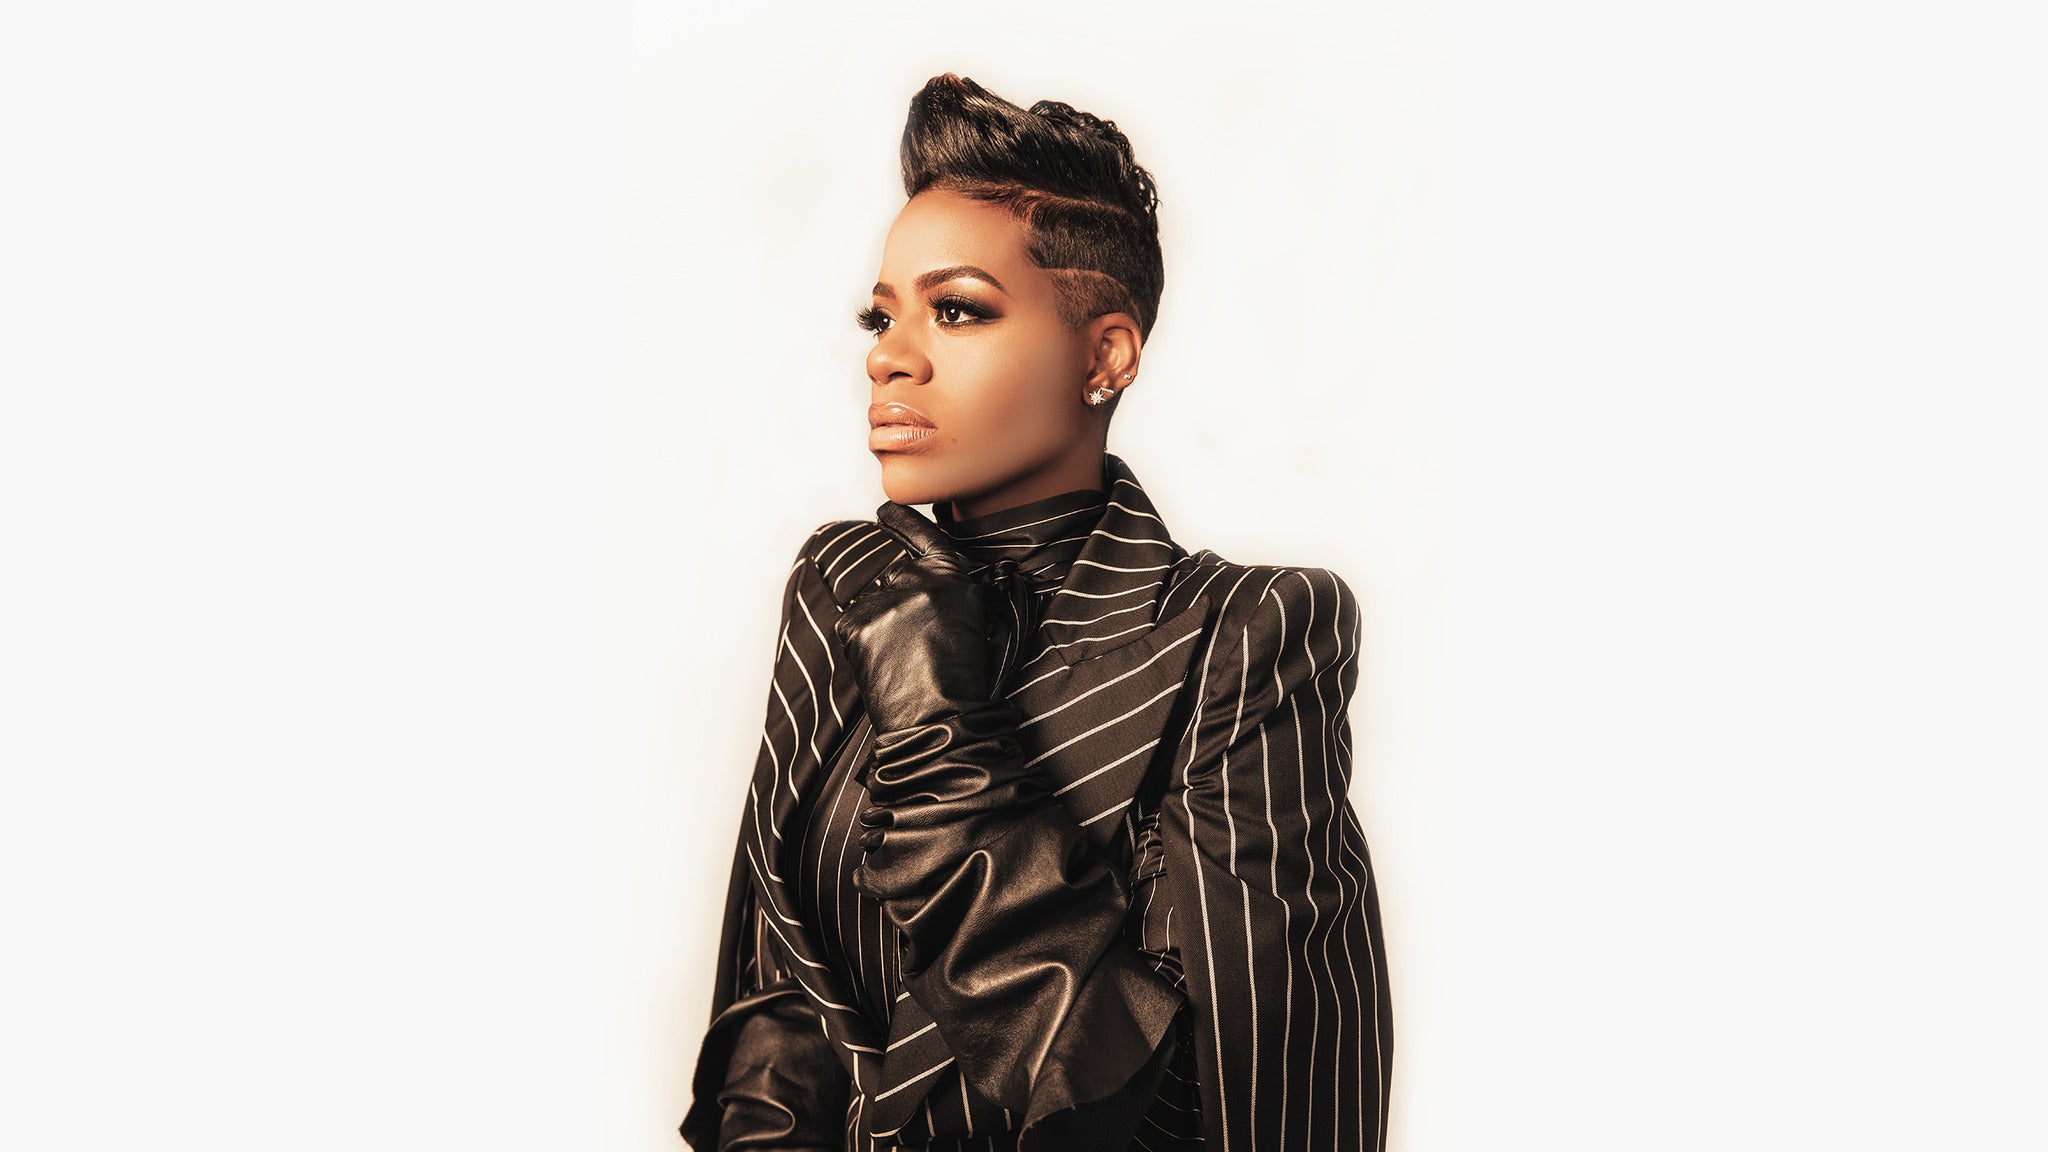 exclusive presale password for Mother's Day Music Festival with Fantasia, NE-YO and Kenny Lattimore affordable tickets in Atlantic City at Boardwalk Hall